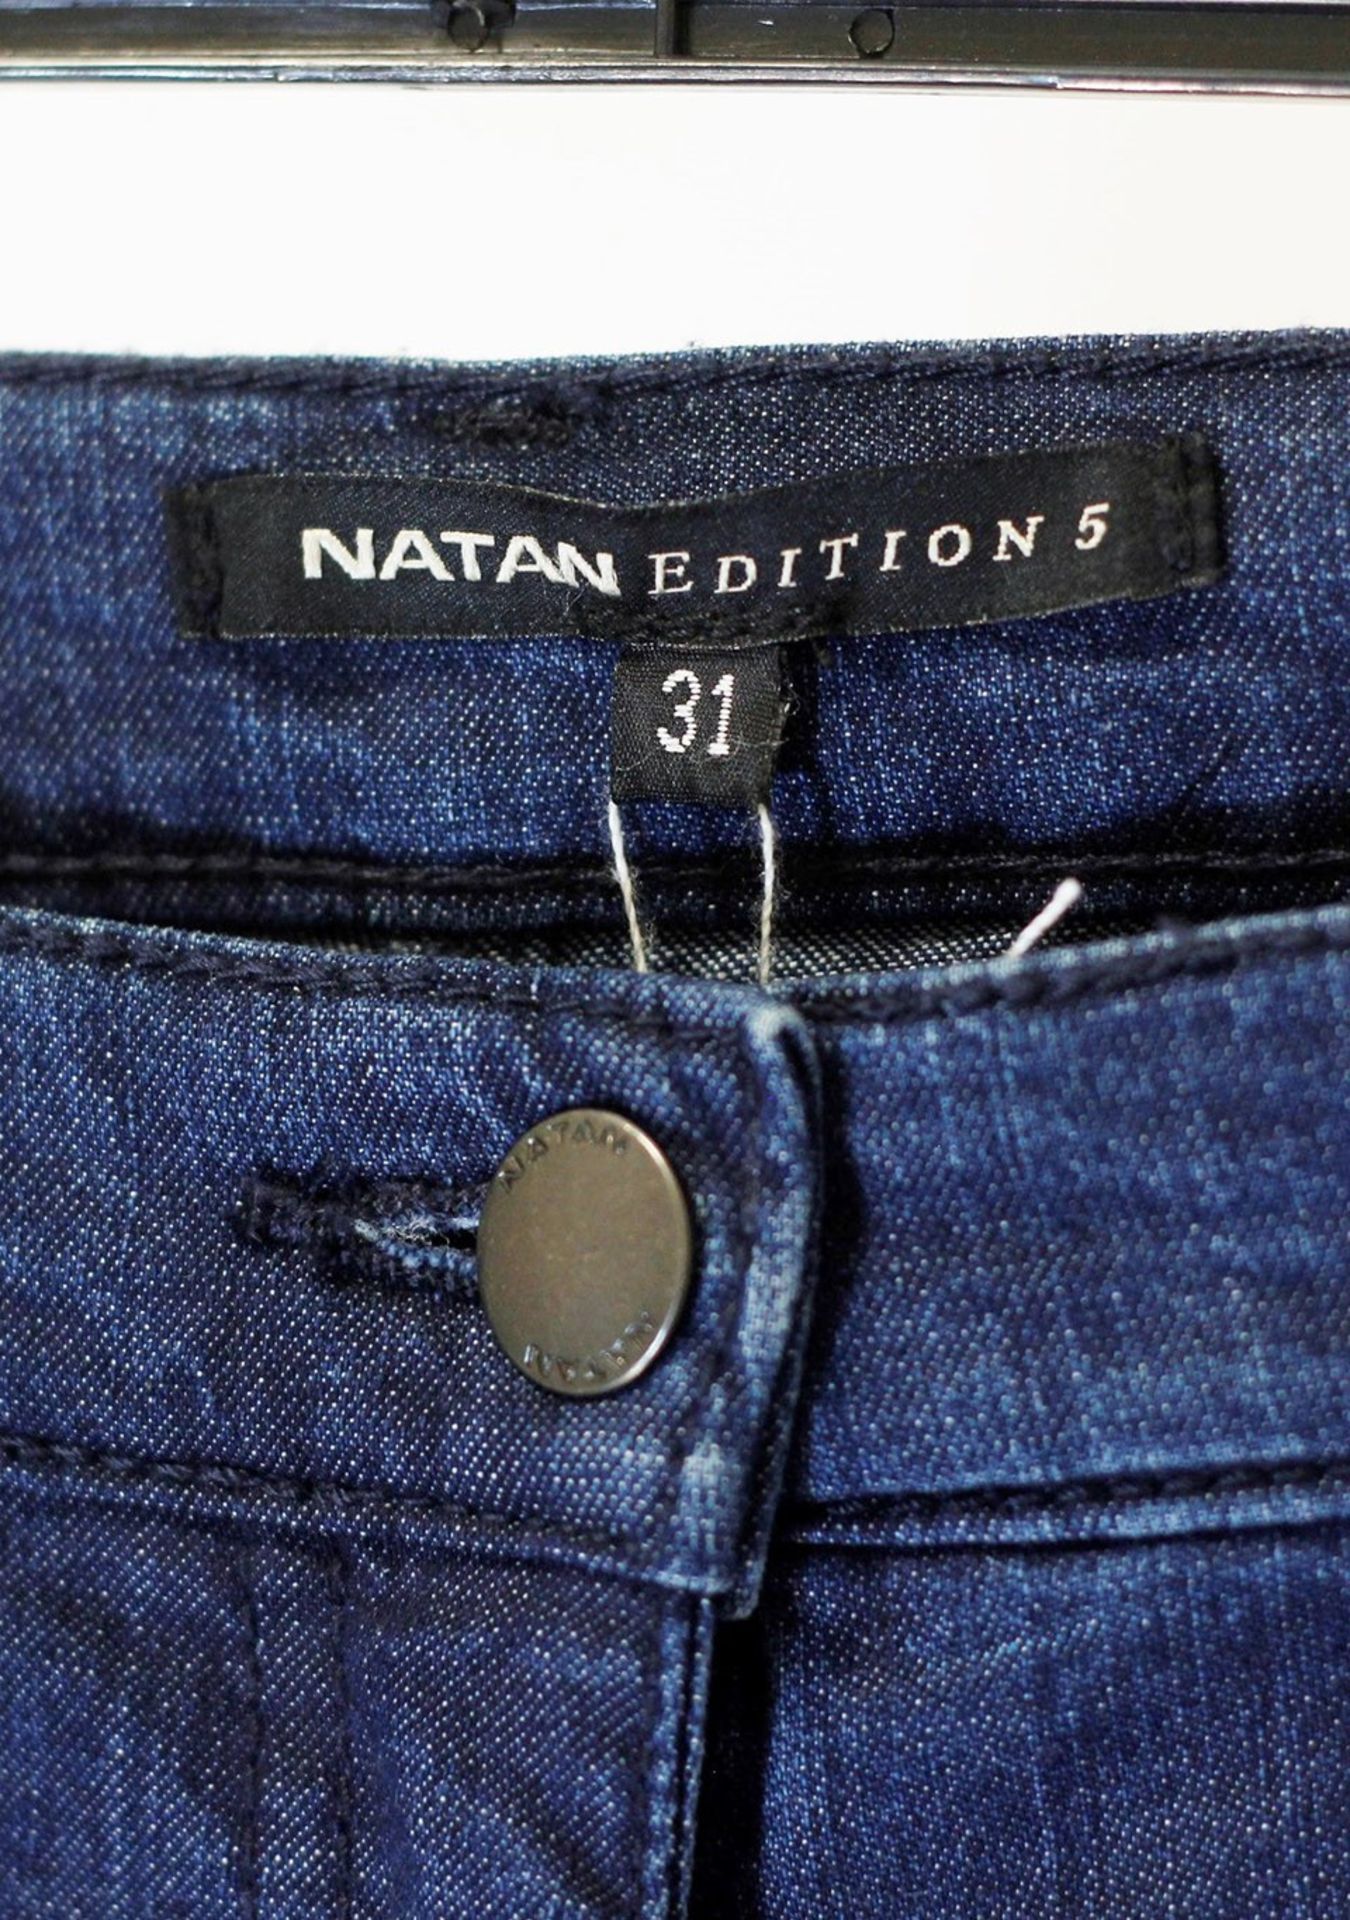 1 x Natan Denim Jeans - Size: 31 Waist - Material: 90% Cotton, 8% Polyester, 2% Elastane - From a - Image 3 of 5